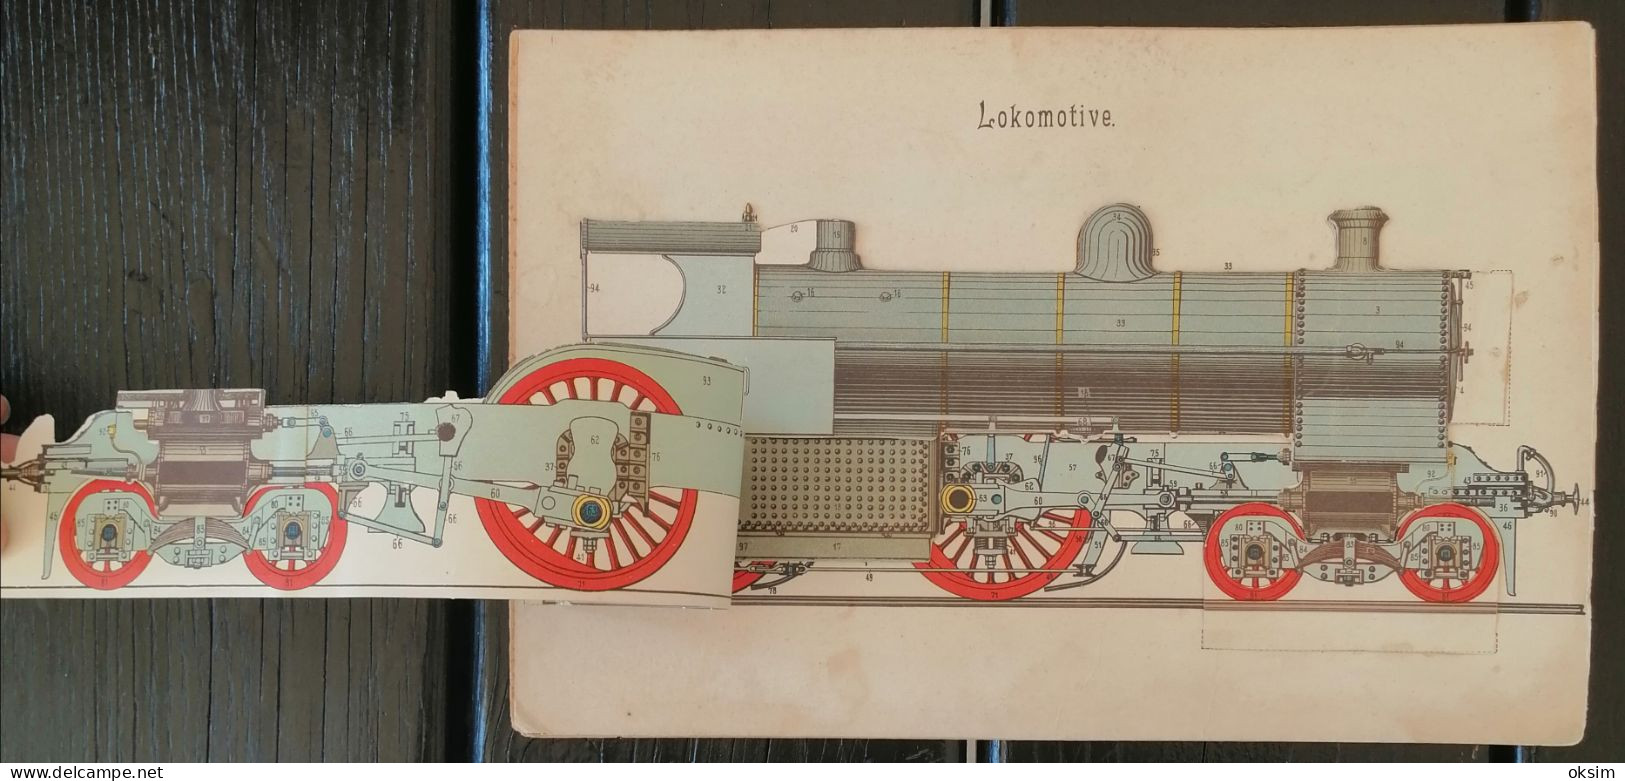 Drawings Of Machinery In Colour, Consisting Of Several Layers That Can Be Unfolded To Show The Interior Of The Machines - Maschinen